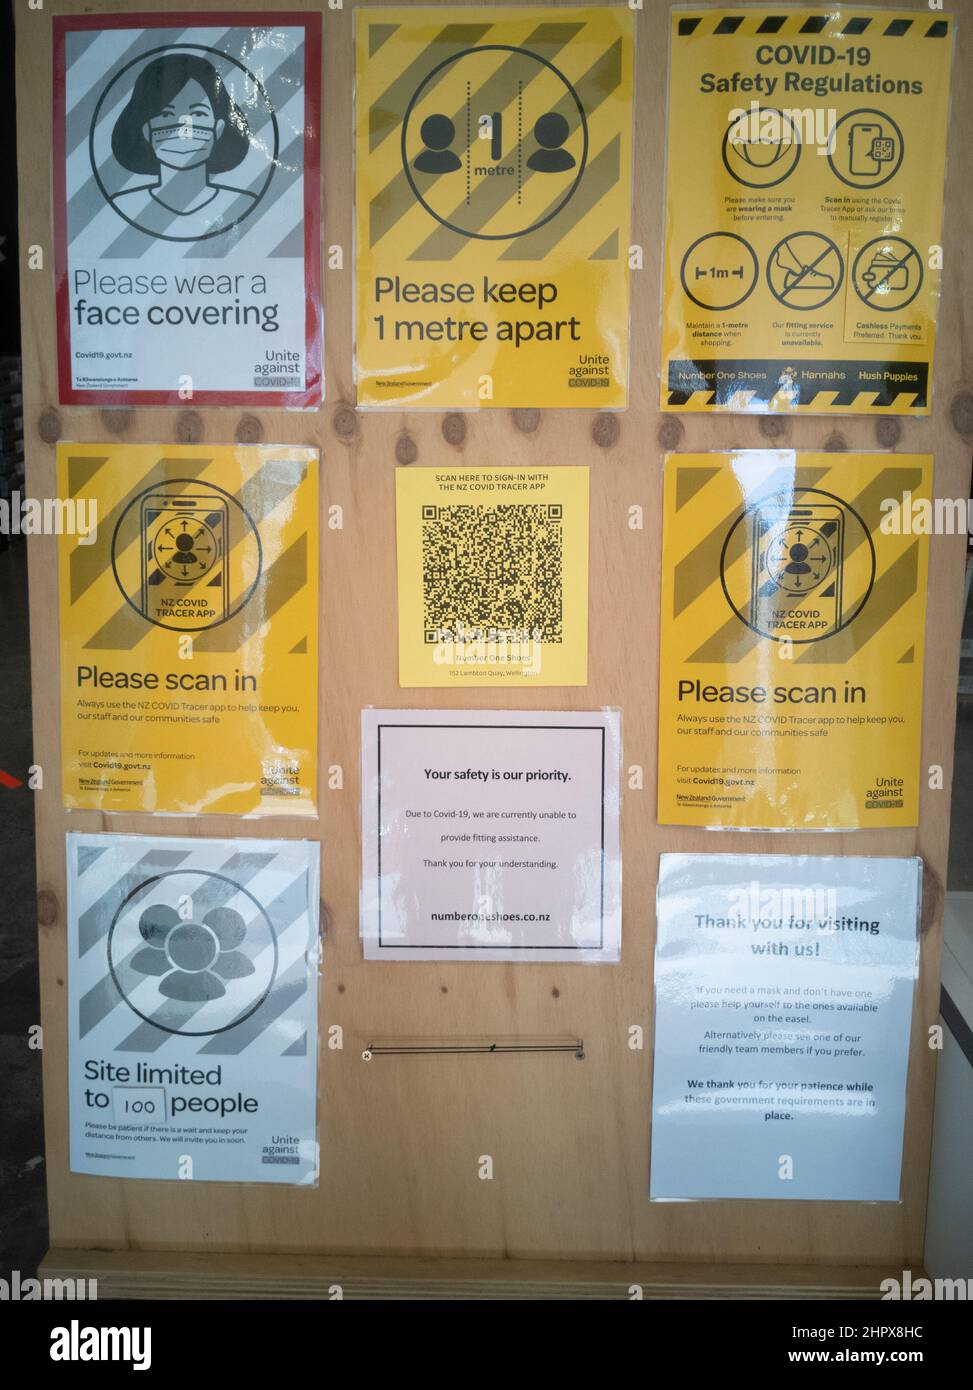 Shop entrance signs with requirements for entry including wearing face masks, distancing and scanning a QR code, during the covid pandemic Stock Photo